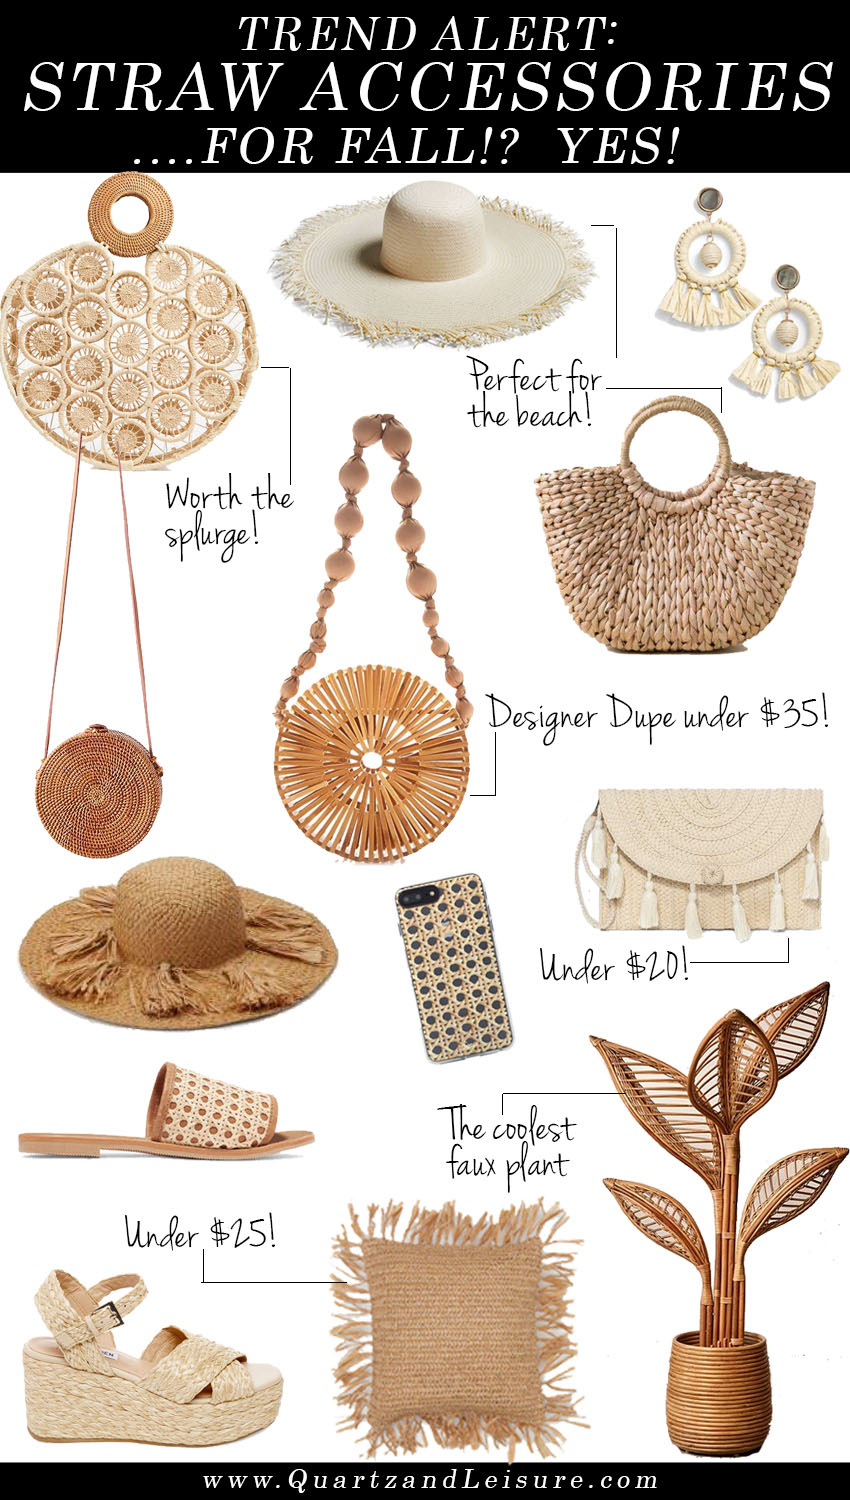 Straw Accessories, Straw Bag Dupes